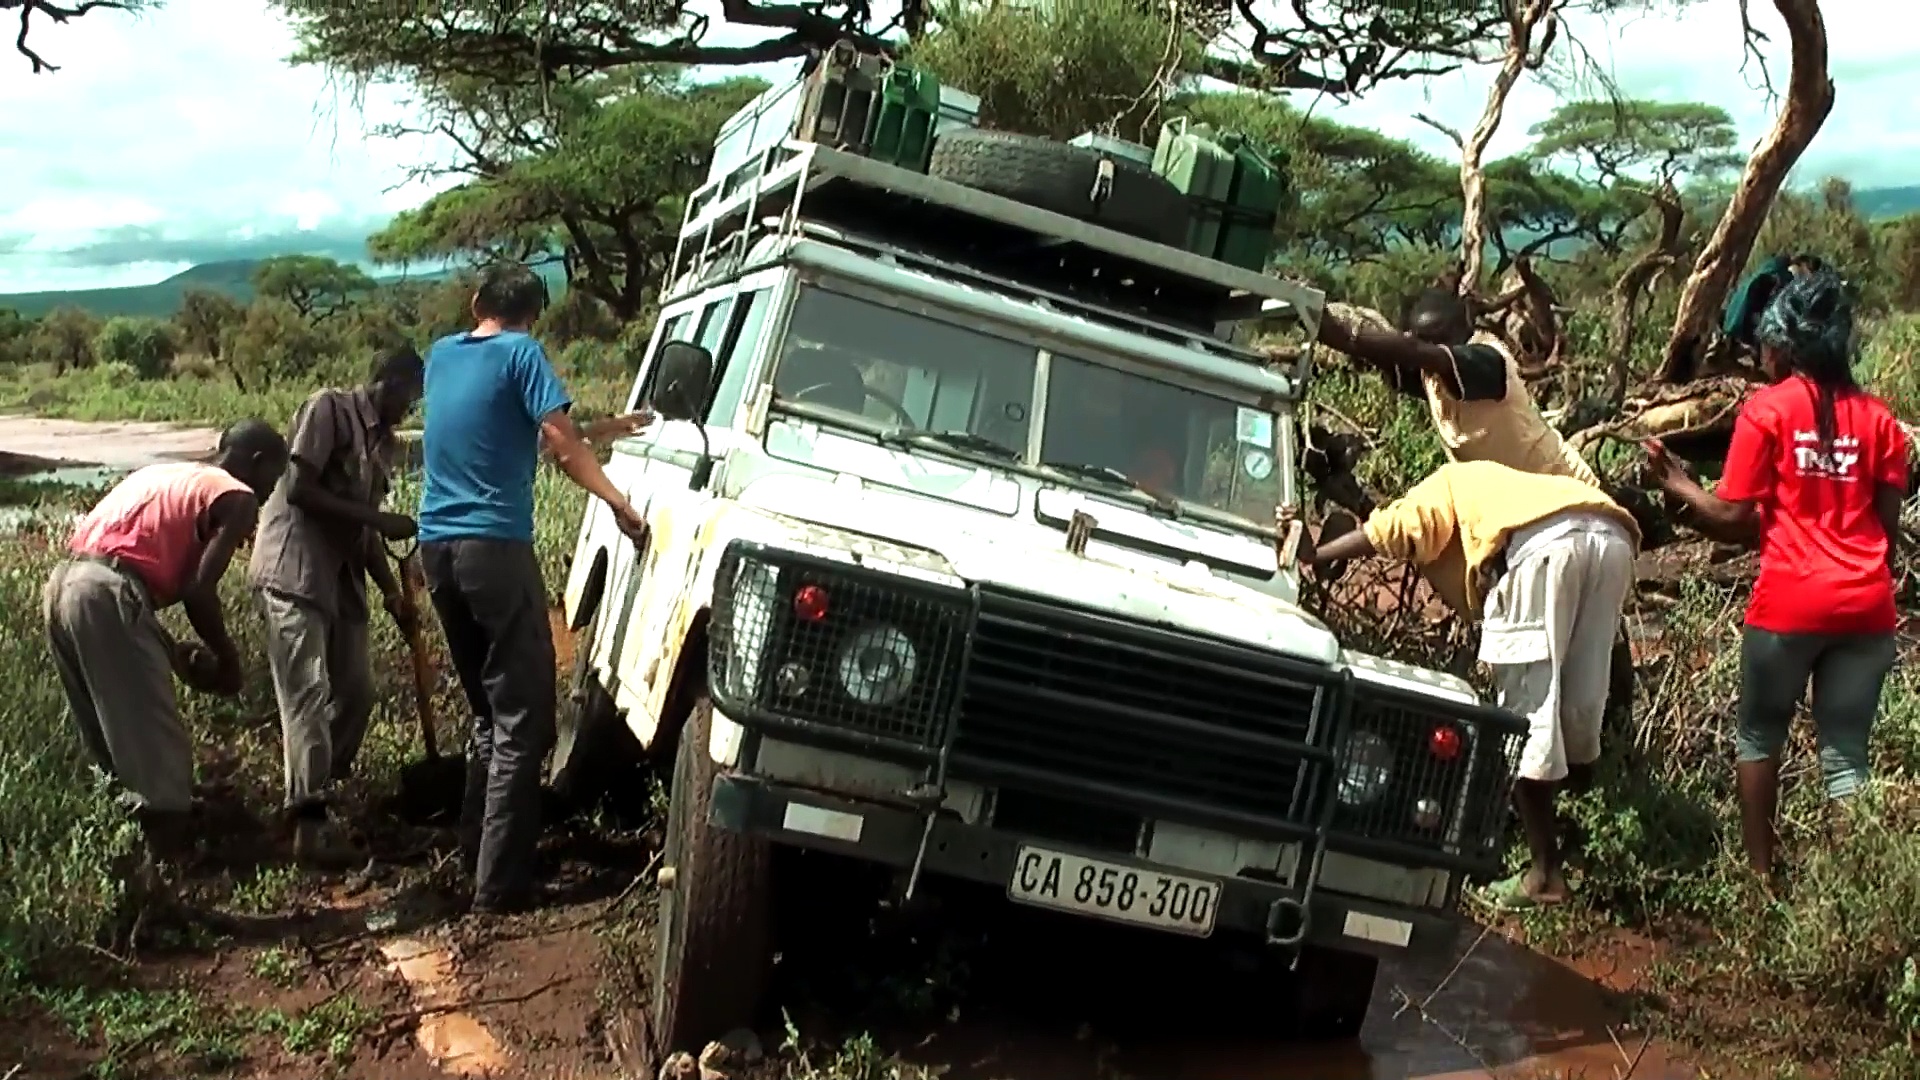 Land Rover in mud after flooding at Amboseli National Park